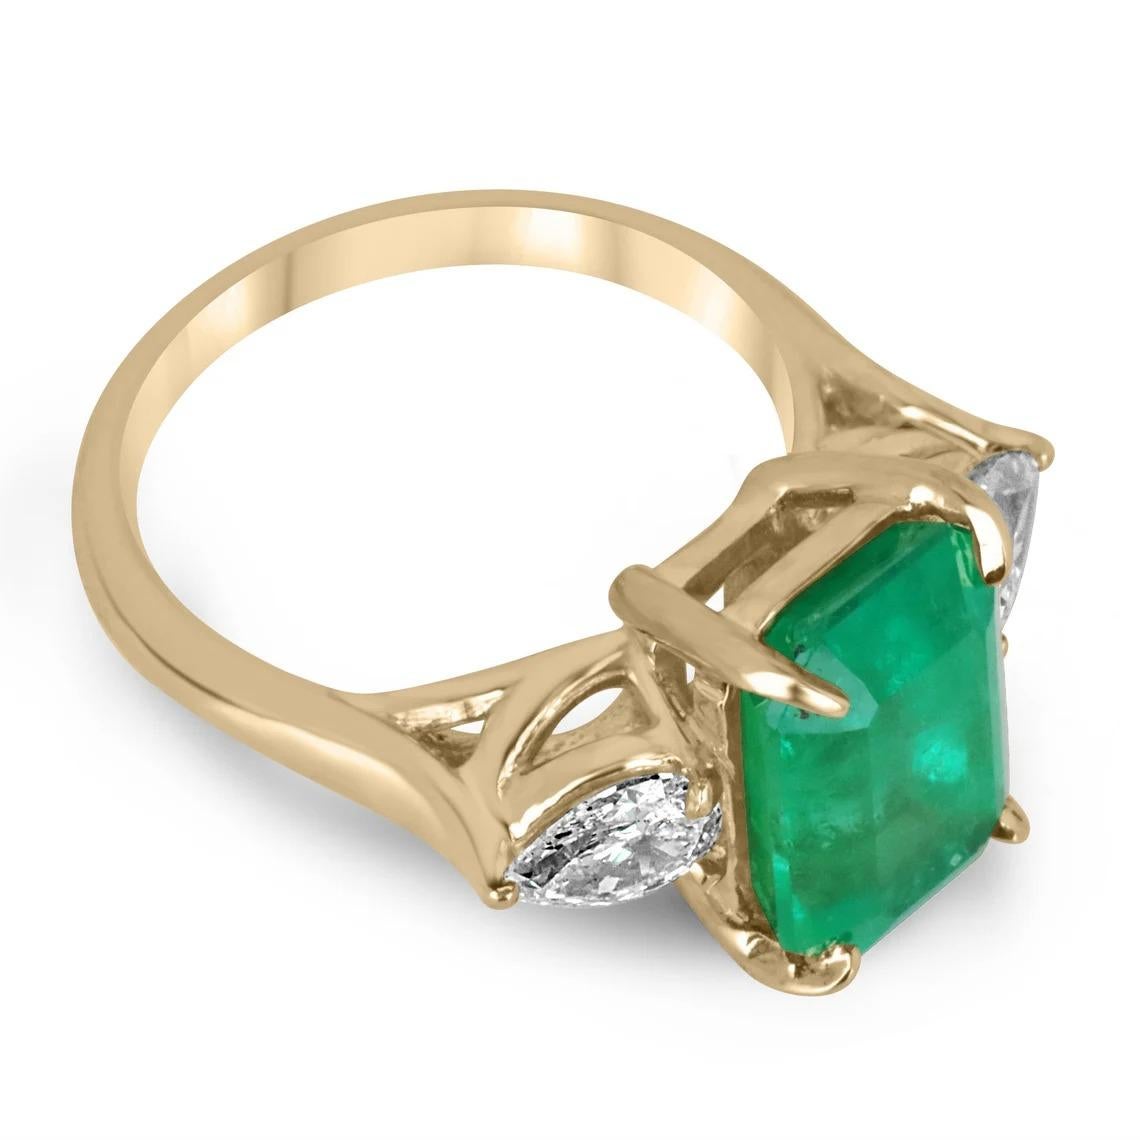 A classic Colombian emerald and diamond engagement, statement, or right-hand ring. Dexterously crafted in 18K gold this ring features a 5.14-carat natural Colombian emerald, emerald cut from the famous Muzo mines. Set in a secure prong setting, this